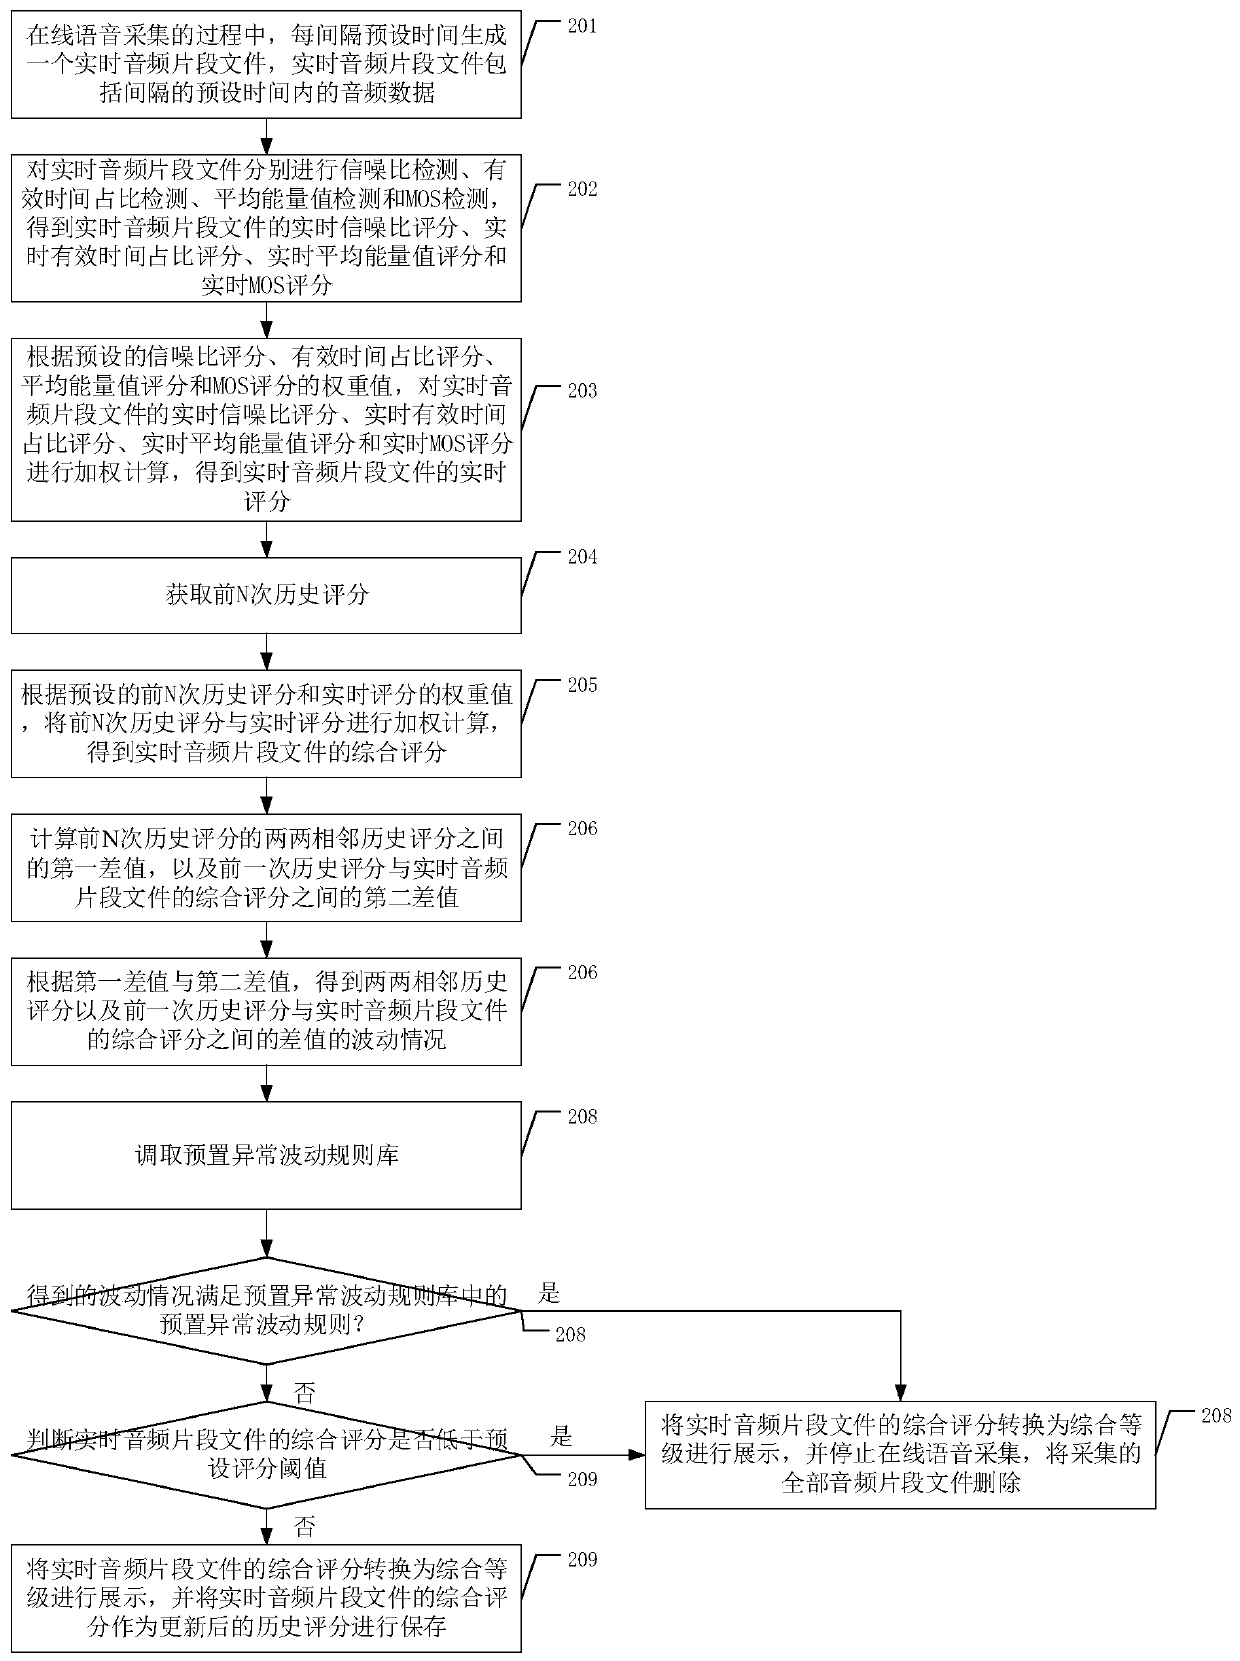 Online real-time voice detection method and device